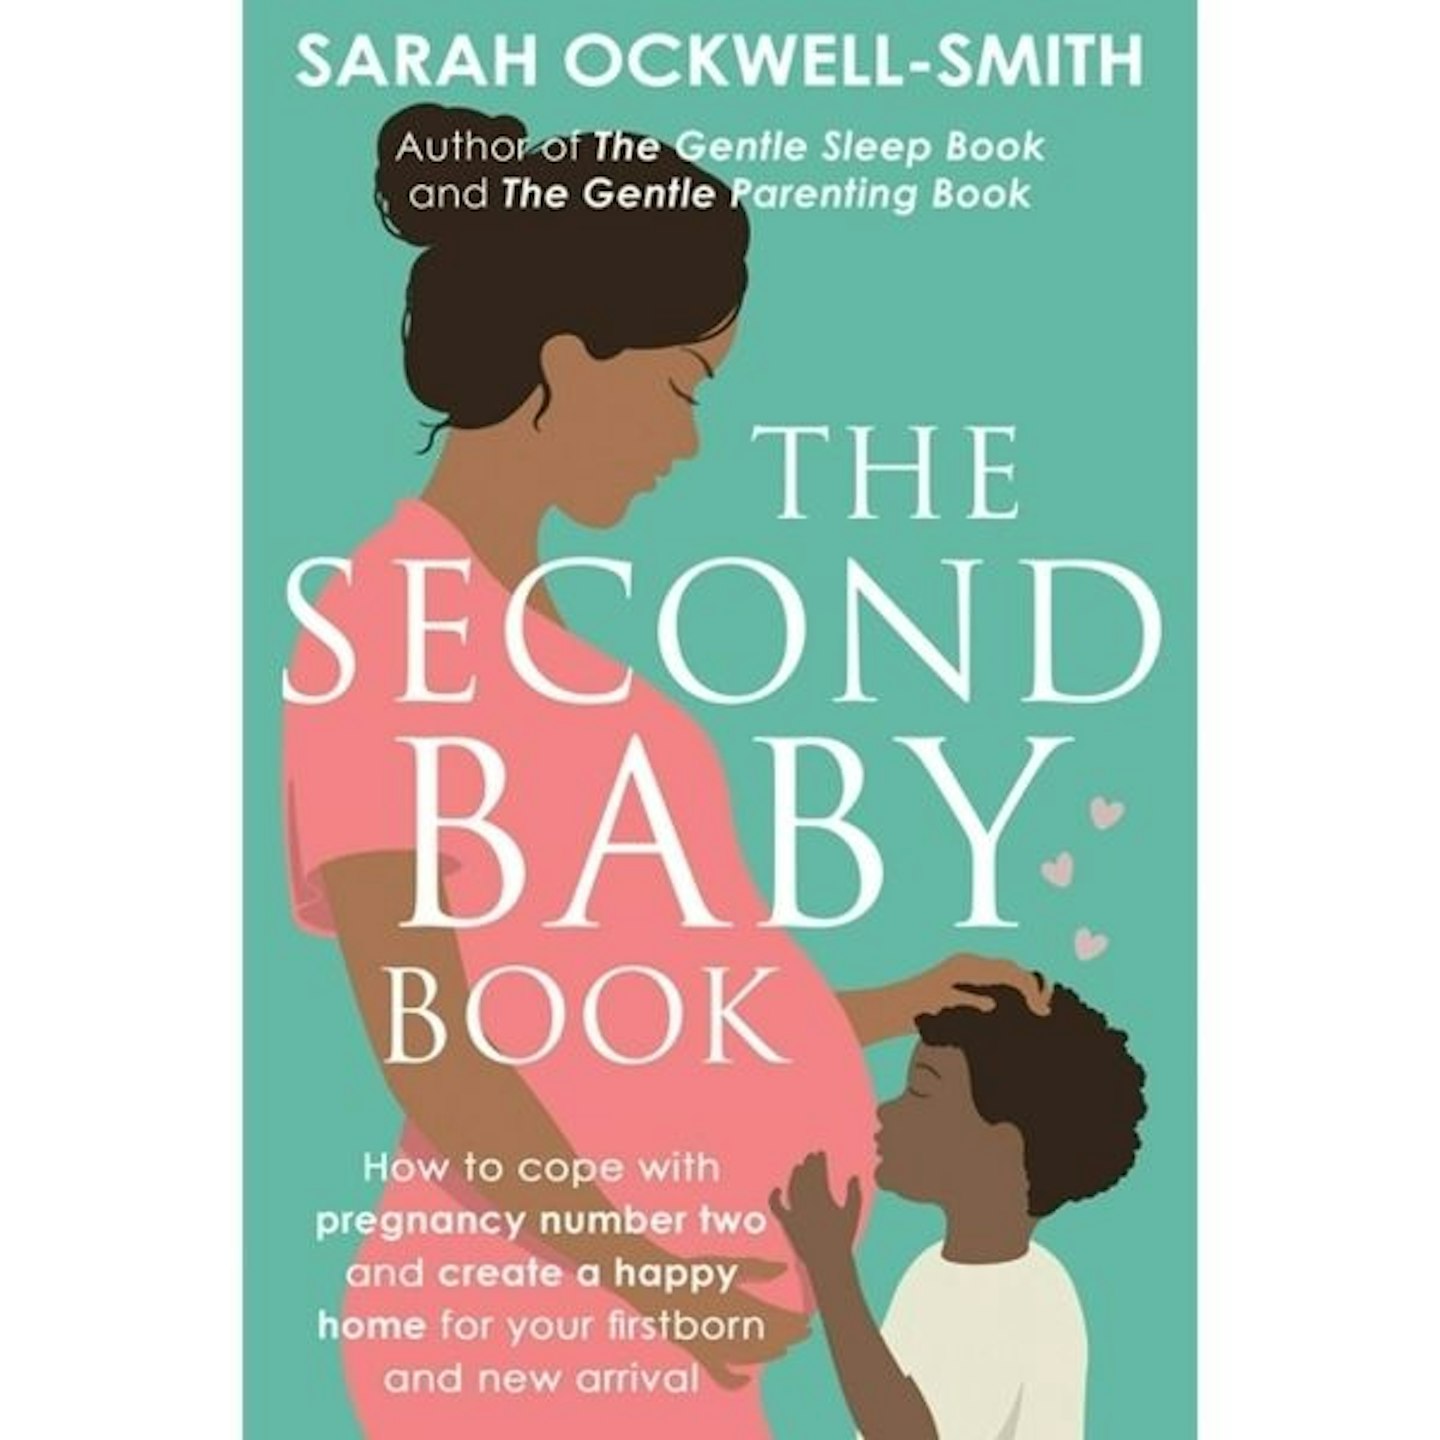 The Second Baby Book, By Sarah Ockwell-Smith